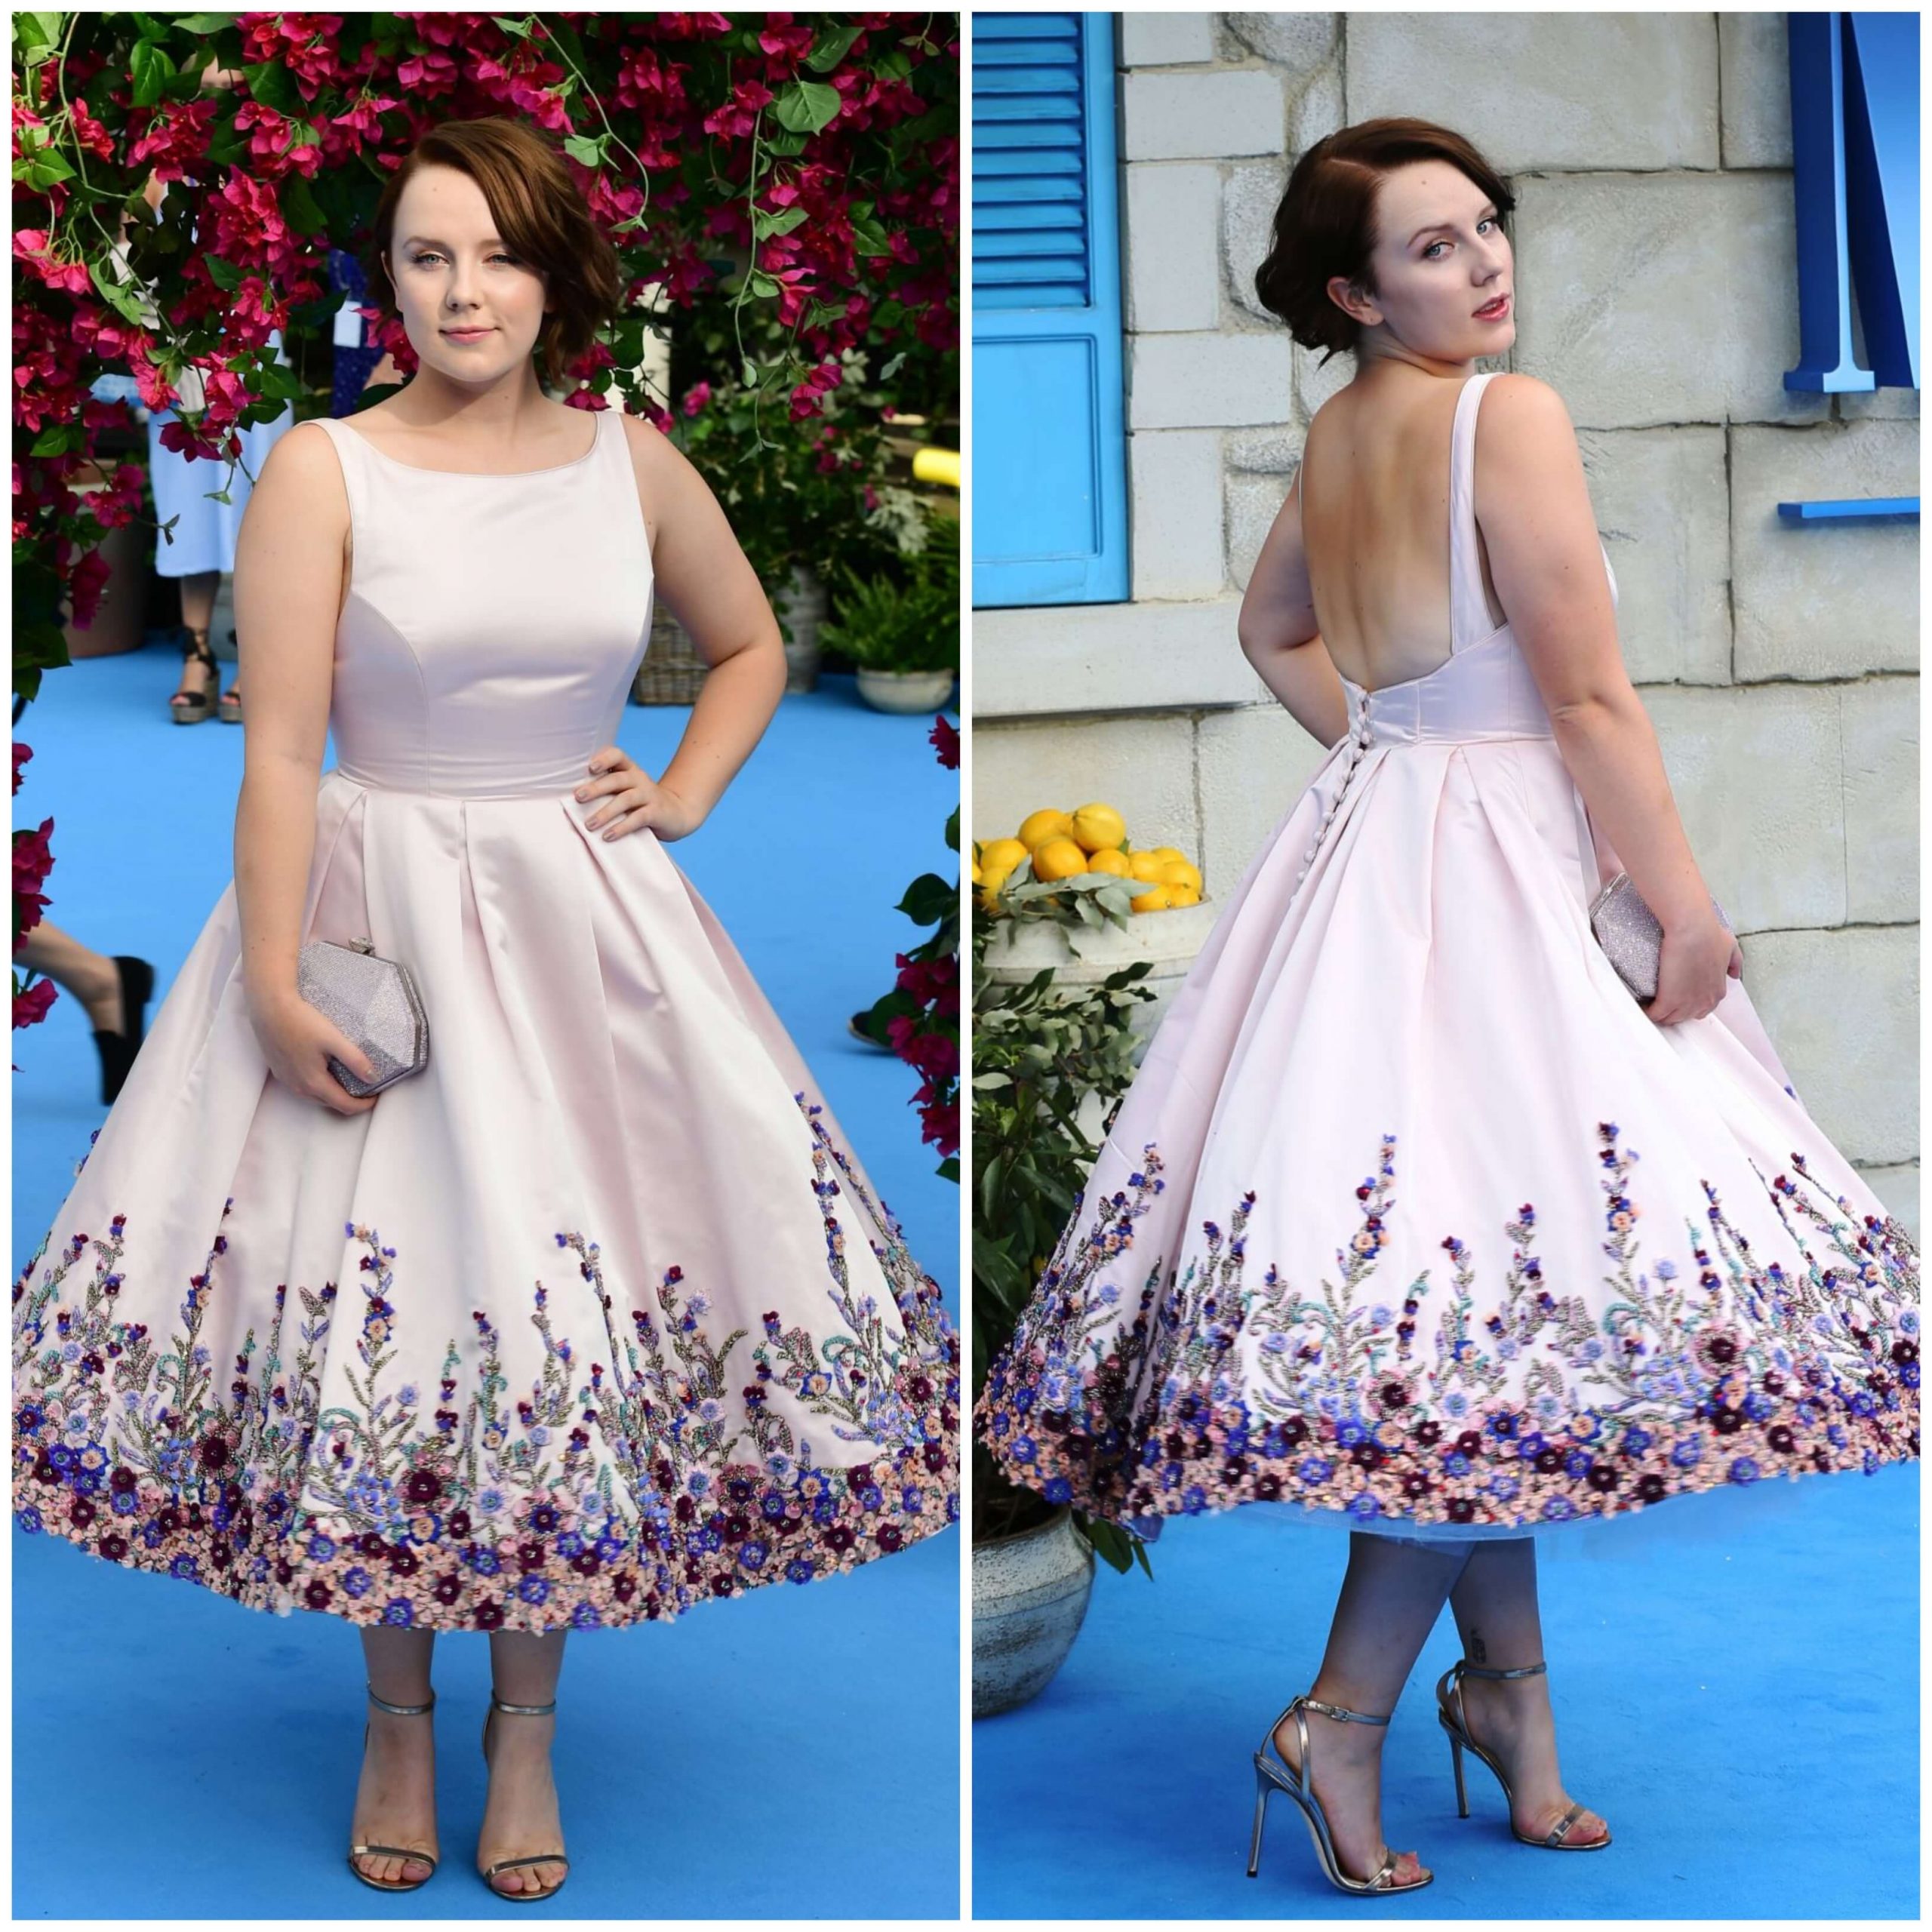 Alexa Davies –In White Floral Printed Flared Gown -  “Mamma Mia: Here We Go Again” Premiere in London